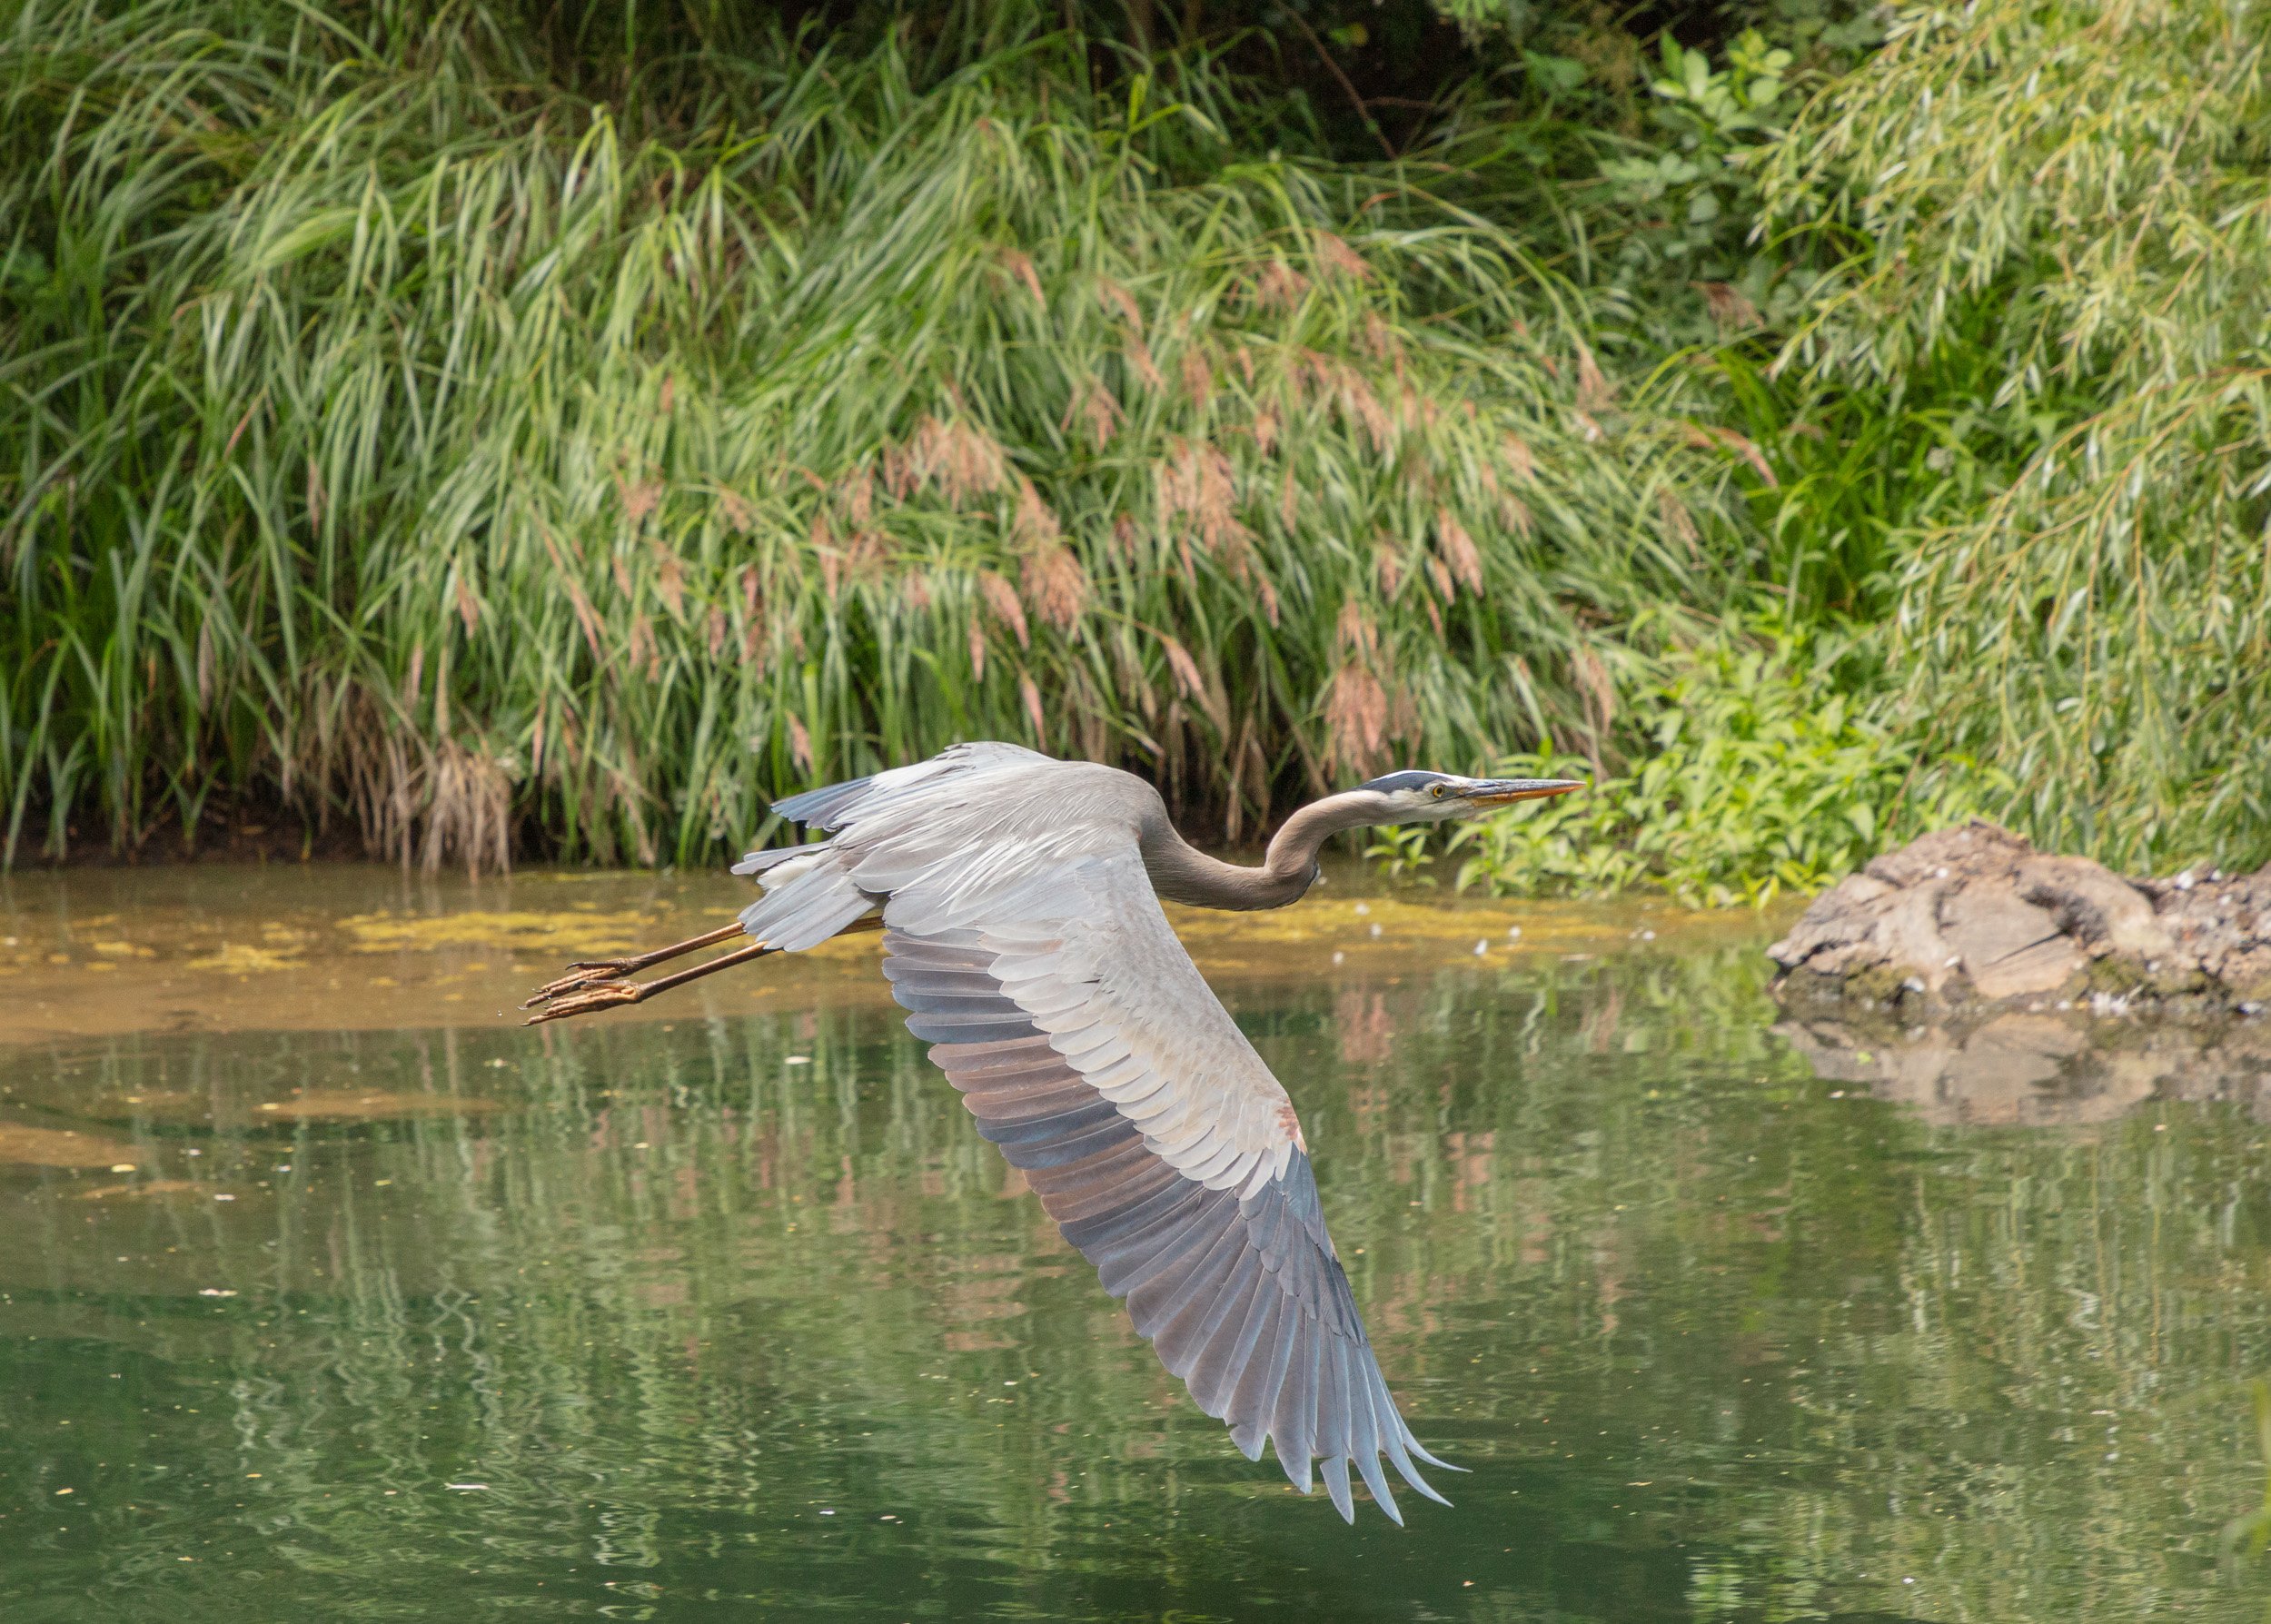 Great Blue Heron at Lily Pond in Golden Gate Park